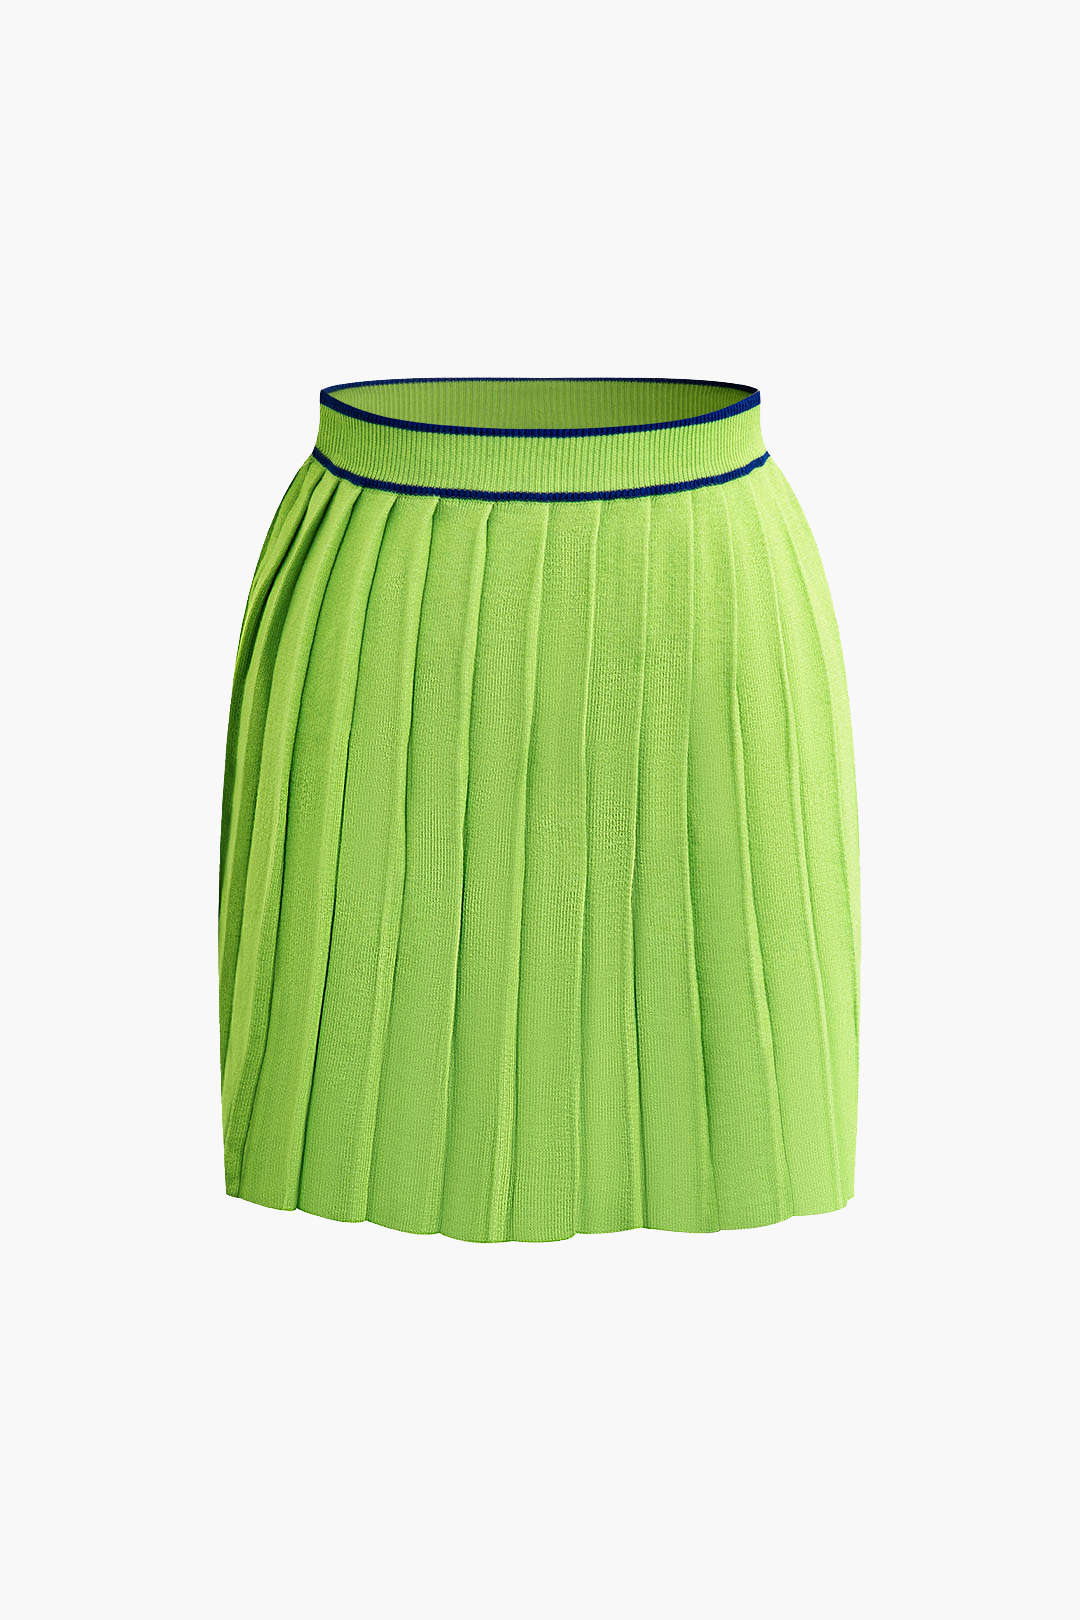 Lime Green and Navy Preppy Knit Tennis Dress with Pleated Skirt Set